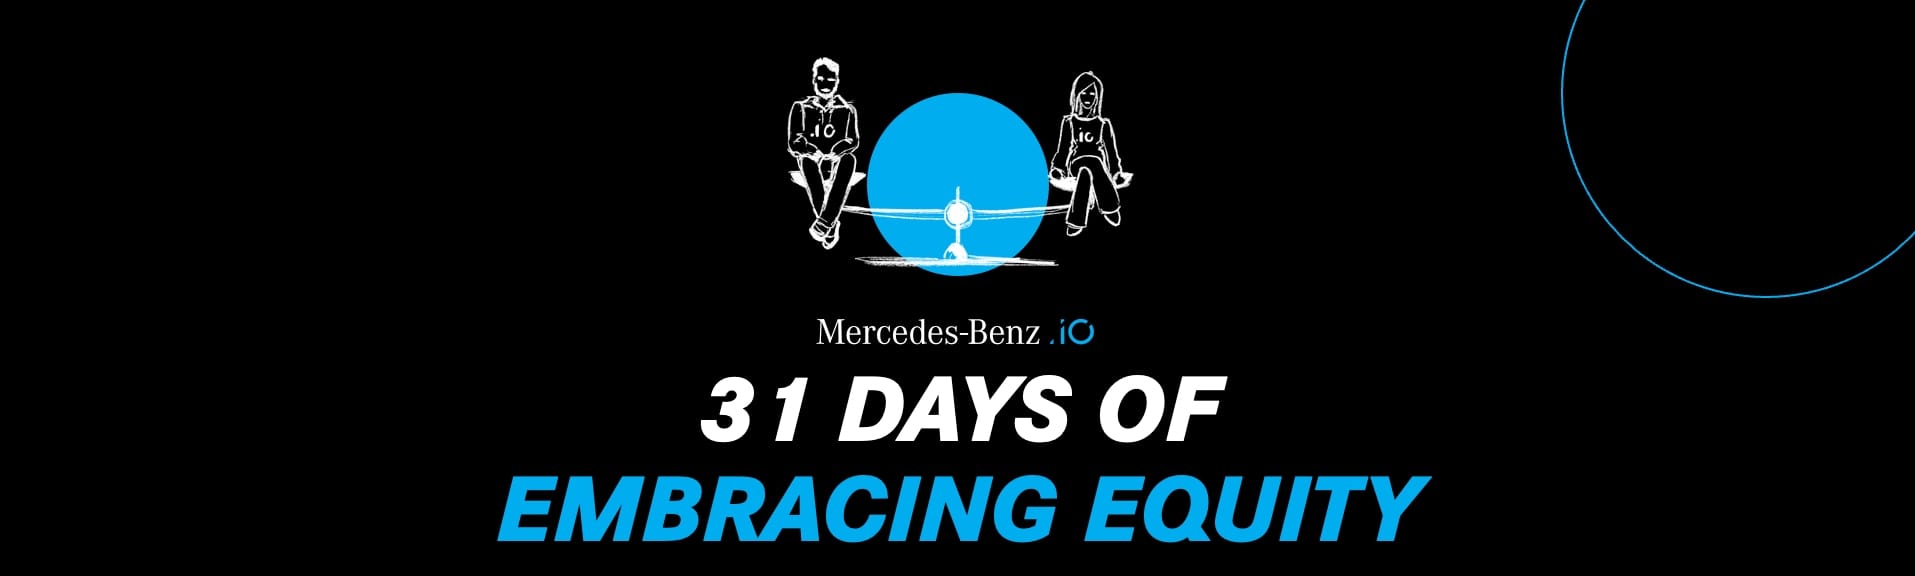 31 DAYS OF EMBRACING EQUITY